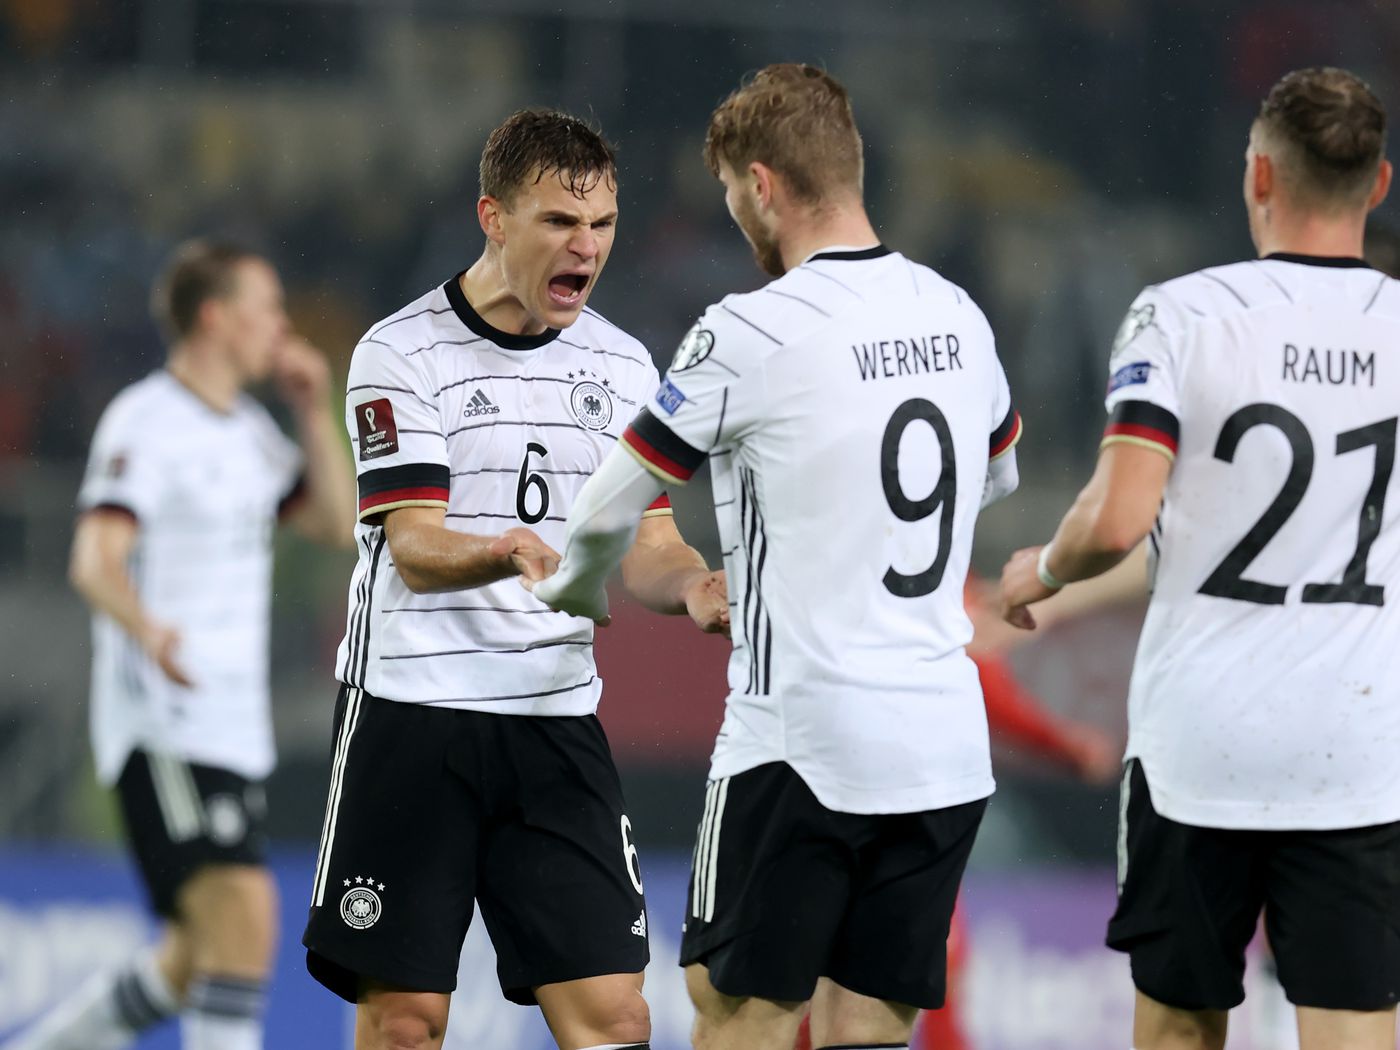 Germany are the first team to officially qualify for the 2022 World Cup in Qatar Football Works